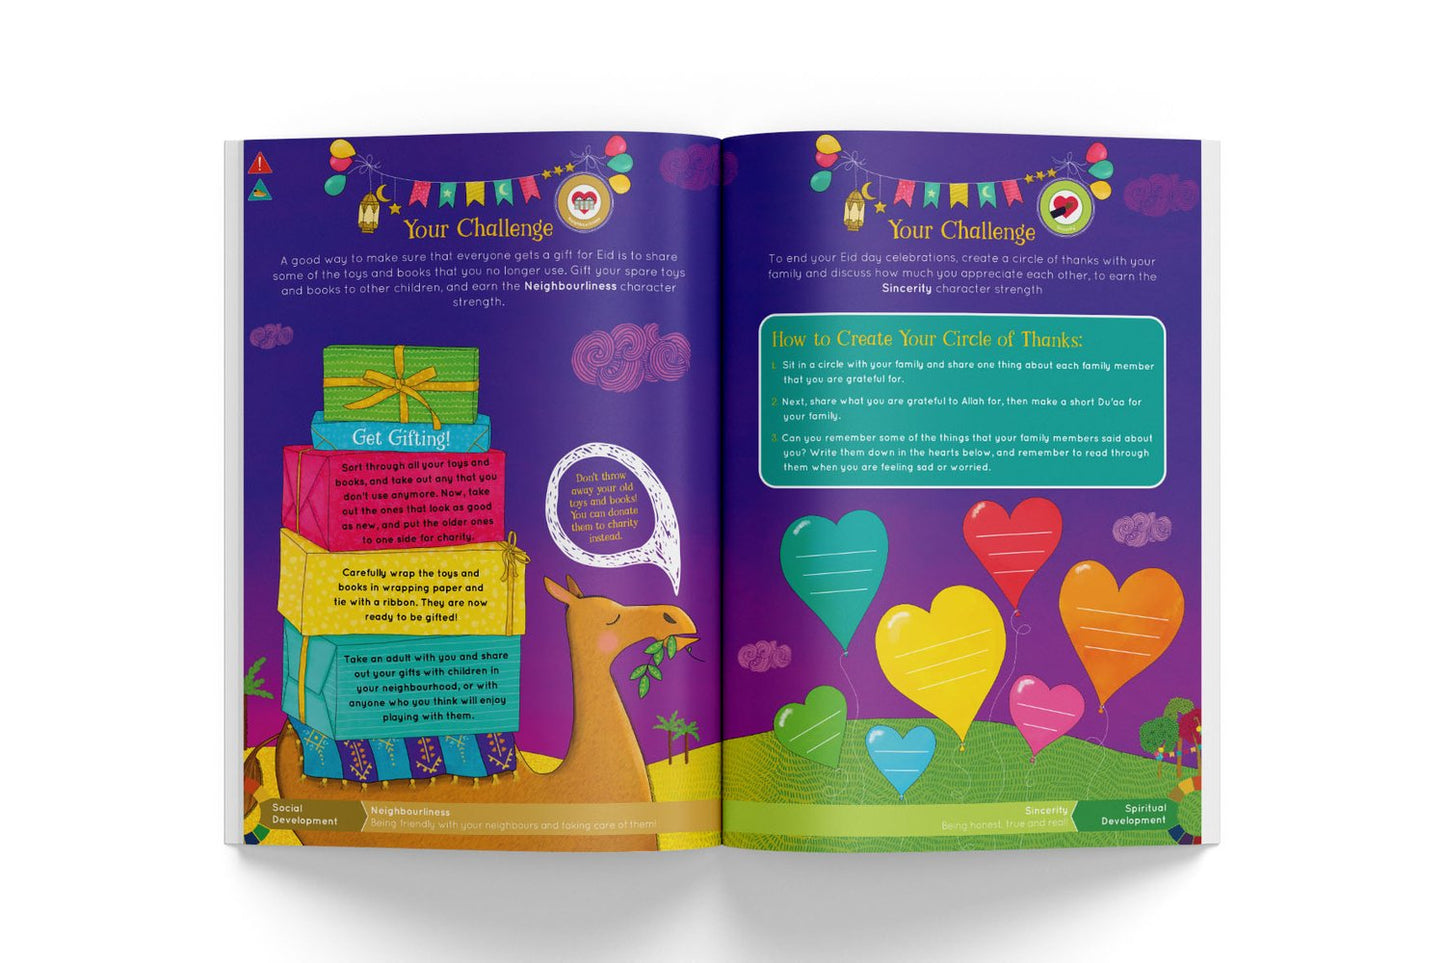 The Big Eid Day - Activity Book